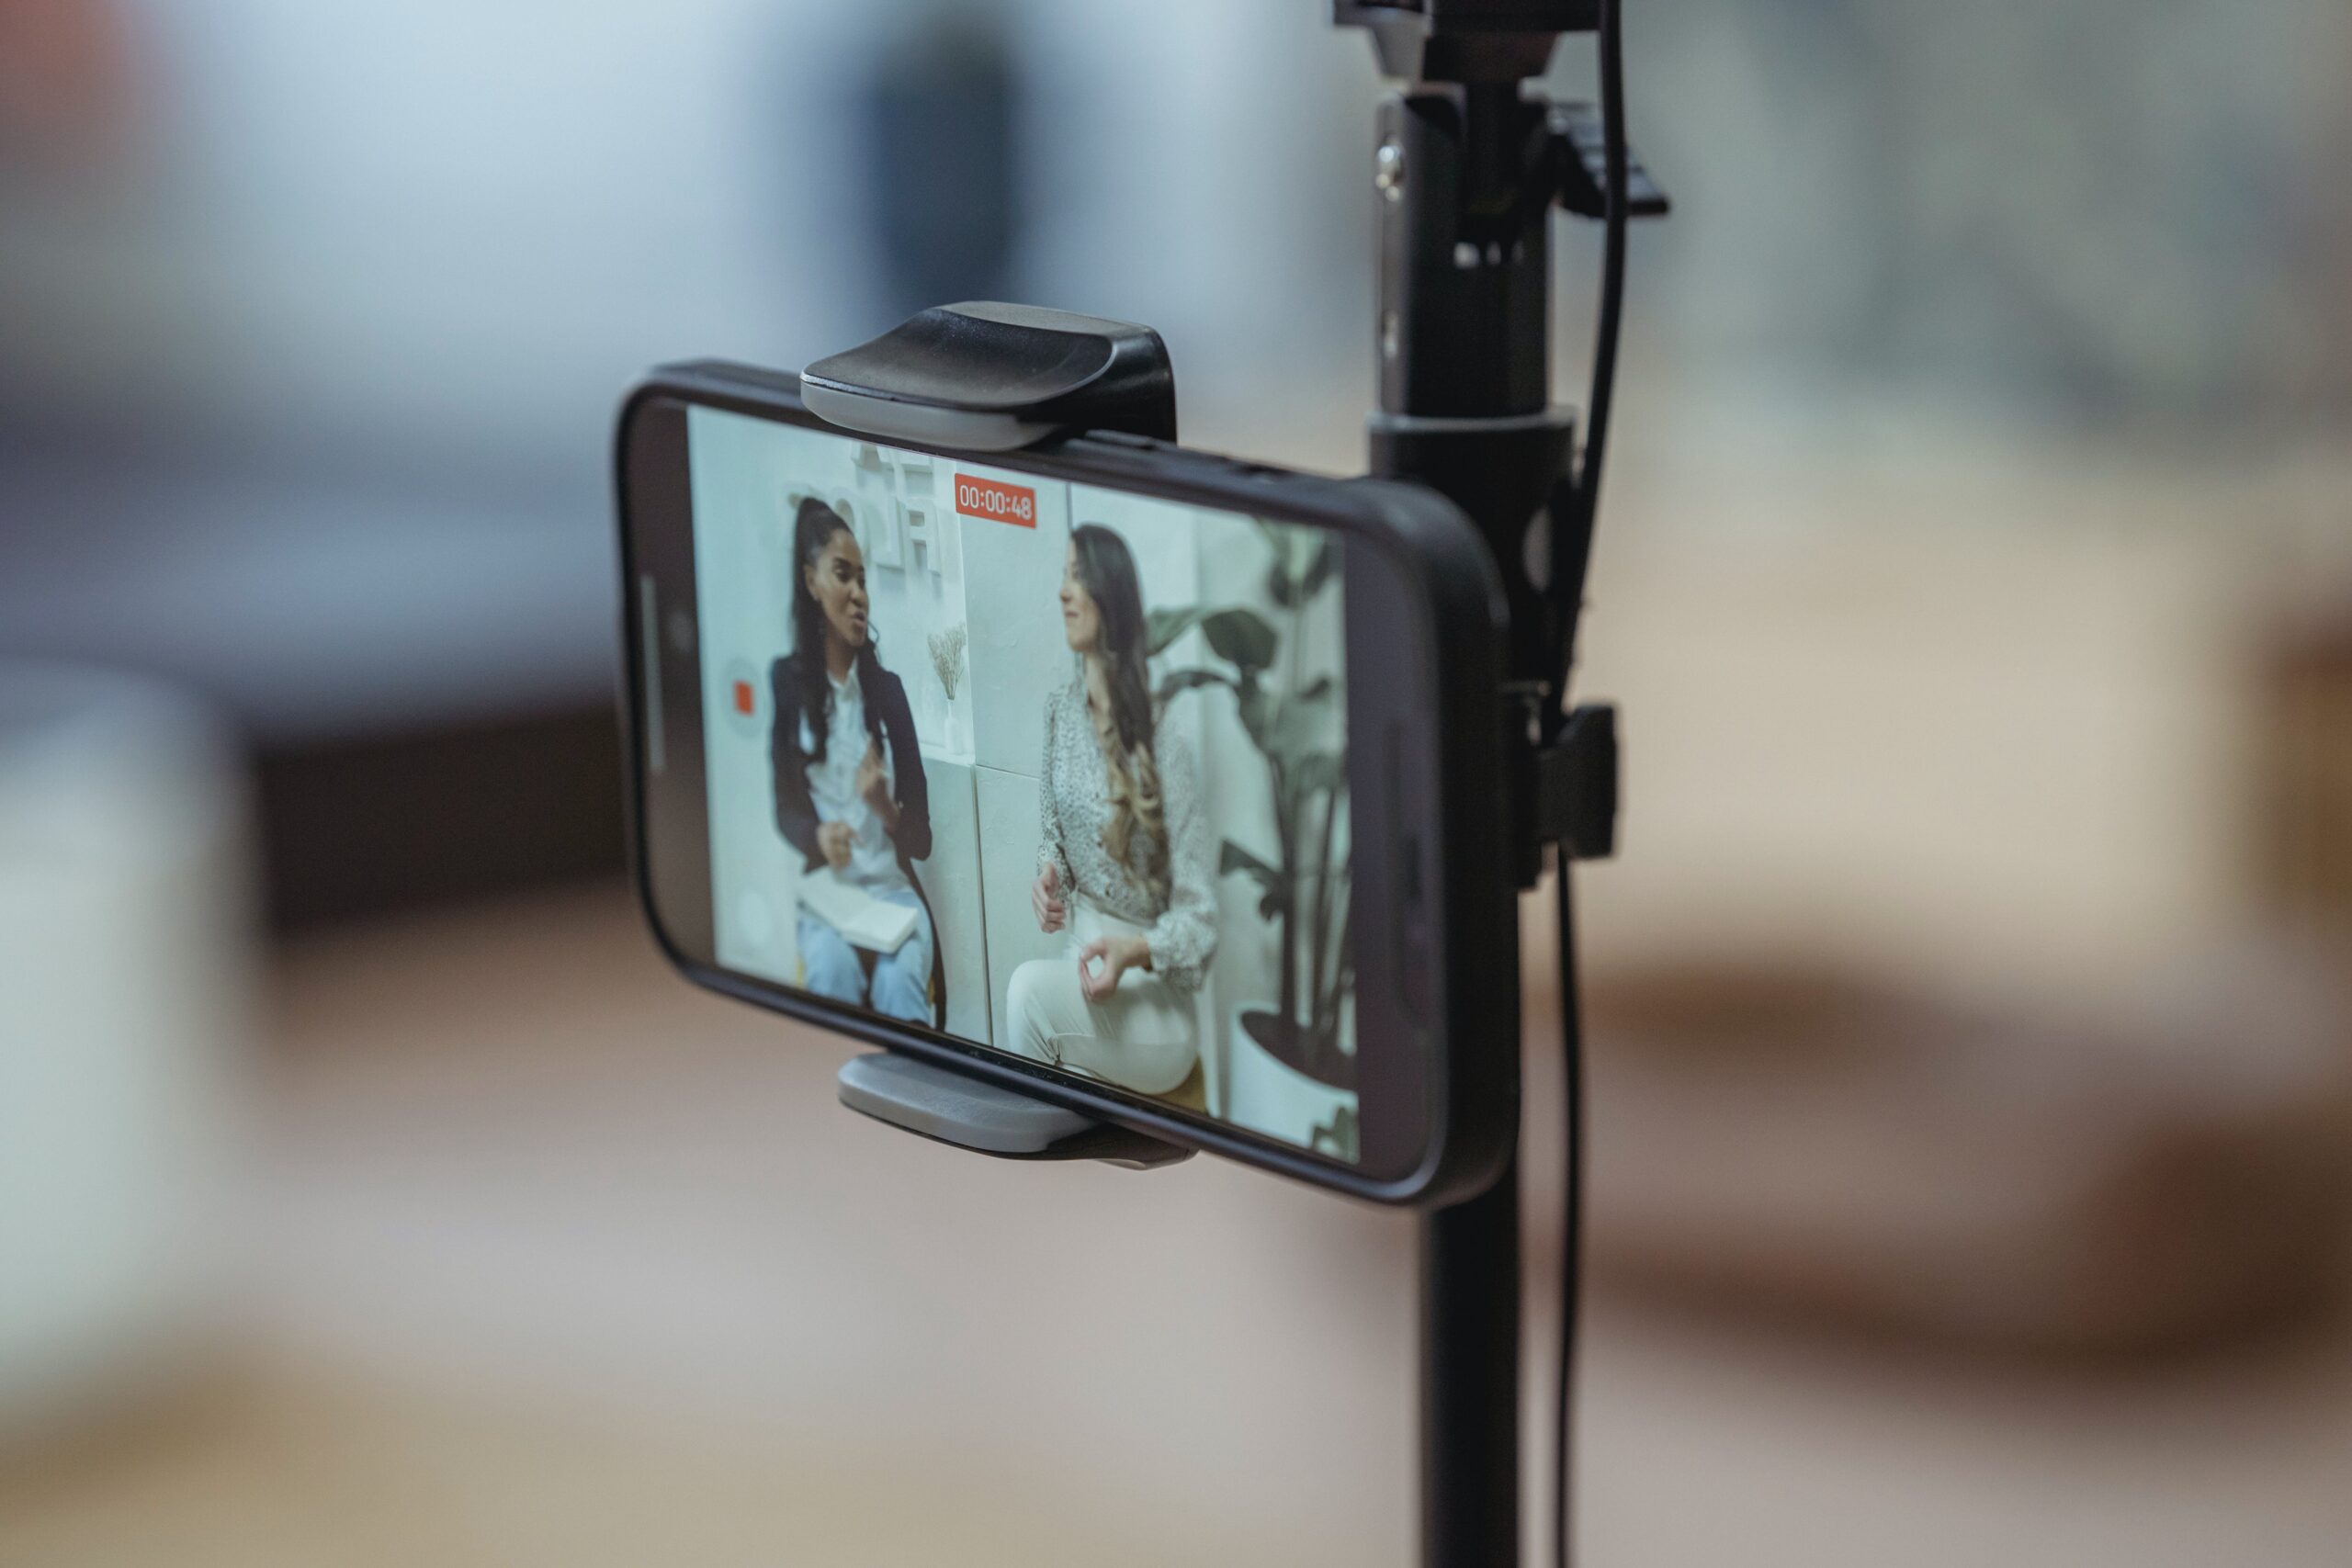 Recording a video using a mobile device to use online